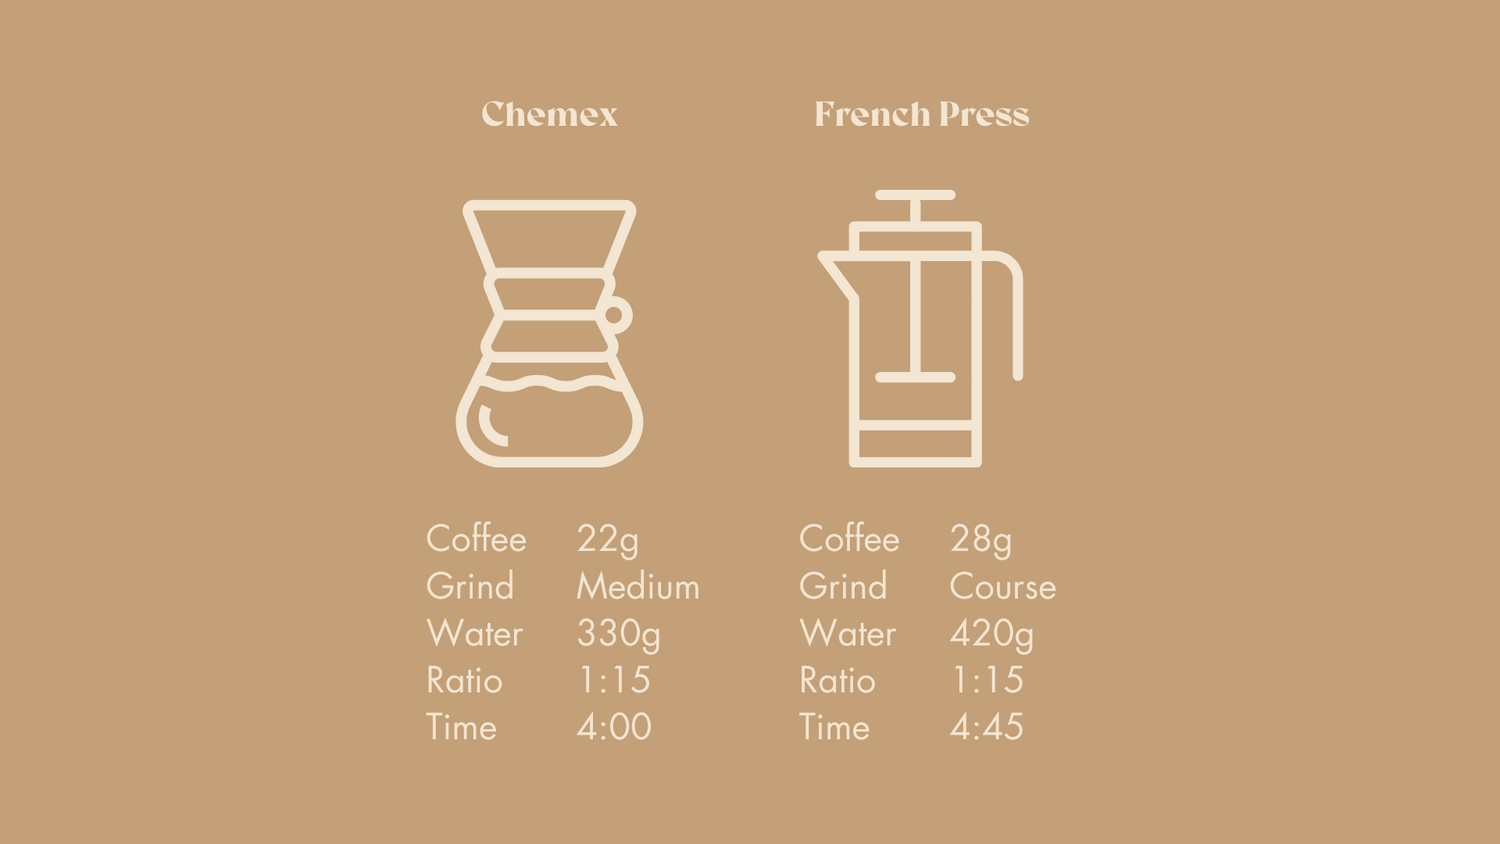 Instructions on how to use coffee beans to make coffee with a chemex and french press